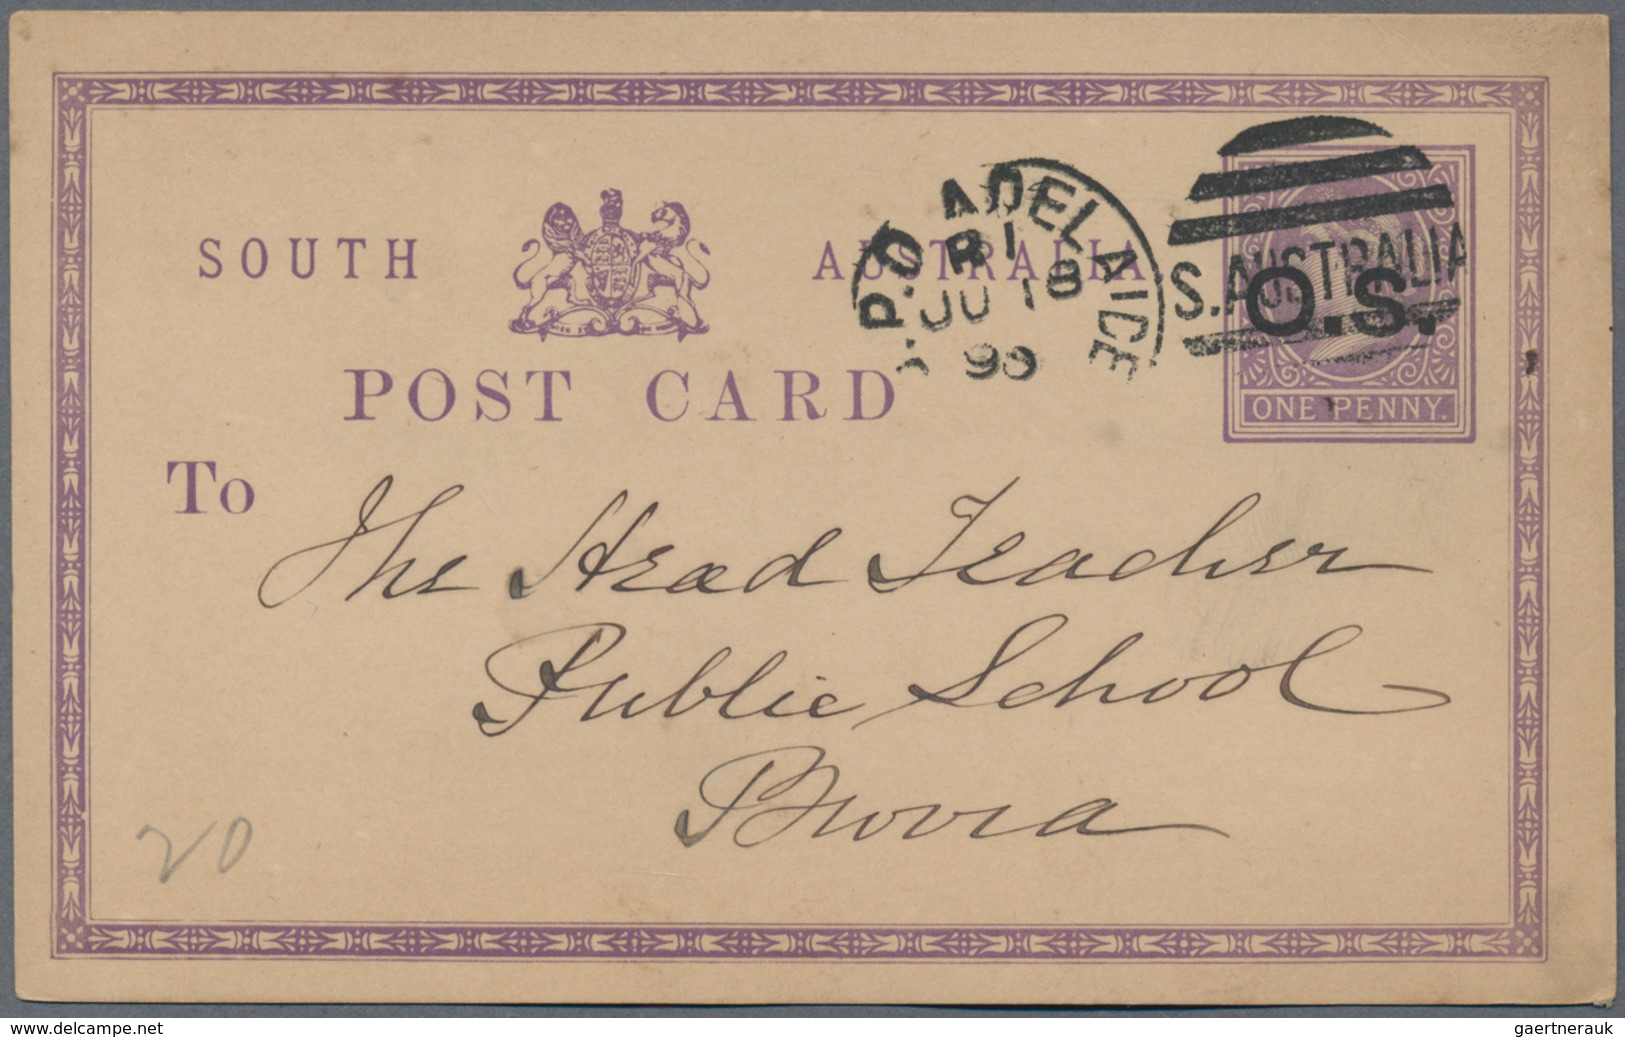 Australische Staaten: 1870's-1900's Ca.: More Than 160 Postal Stationery Items From Victoria, South - Colecciones